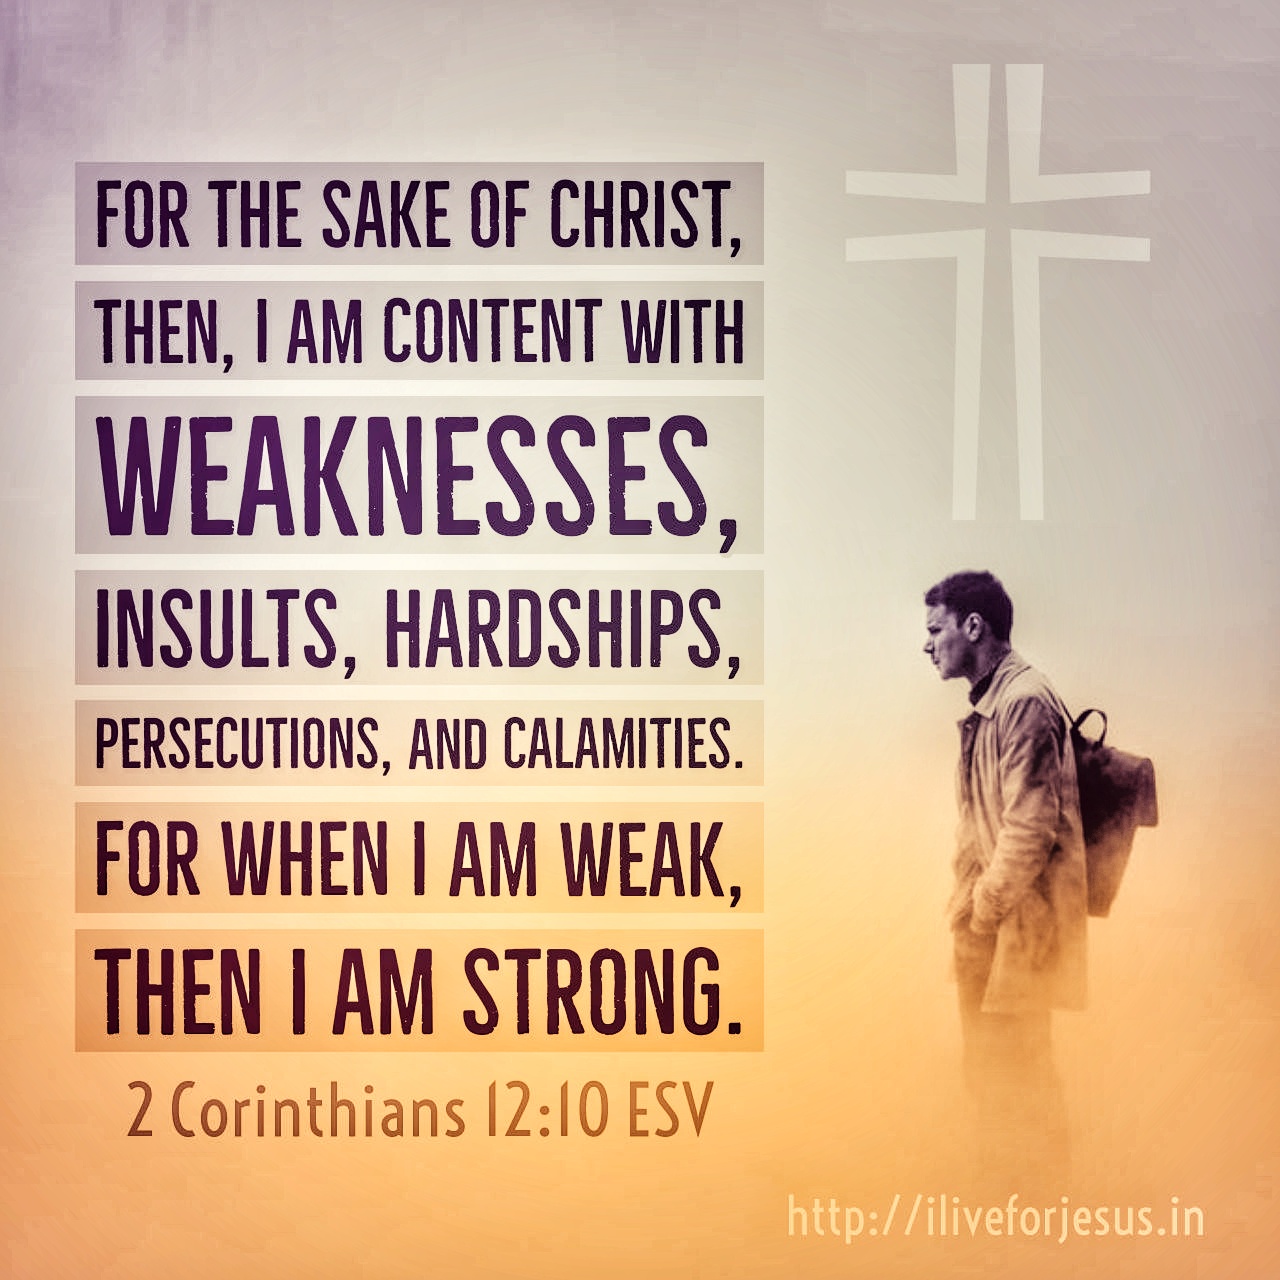 For the sake of Christ, then, I am content with weaknesses, insults, hardships, persecutions, and calamities. For when I am weak, then I am strong. 2 Corinthians 12:10 ESV